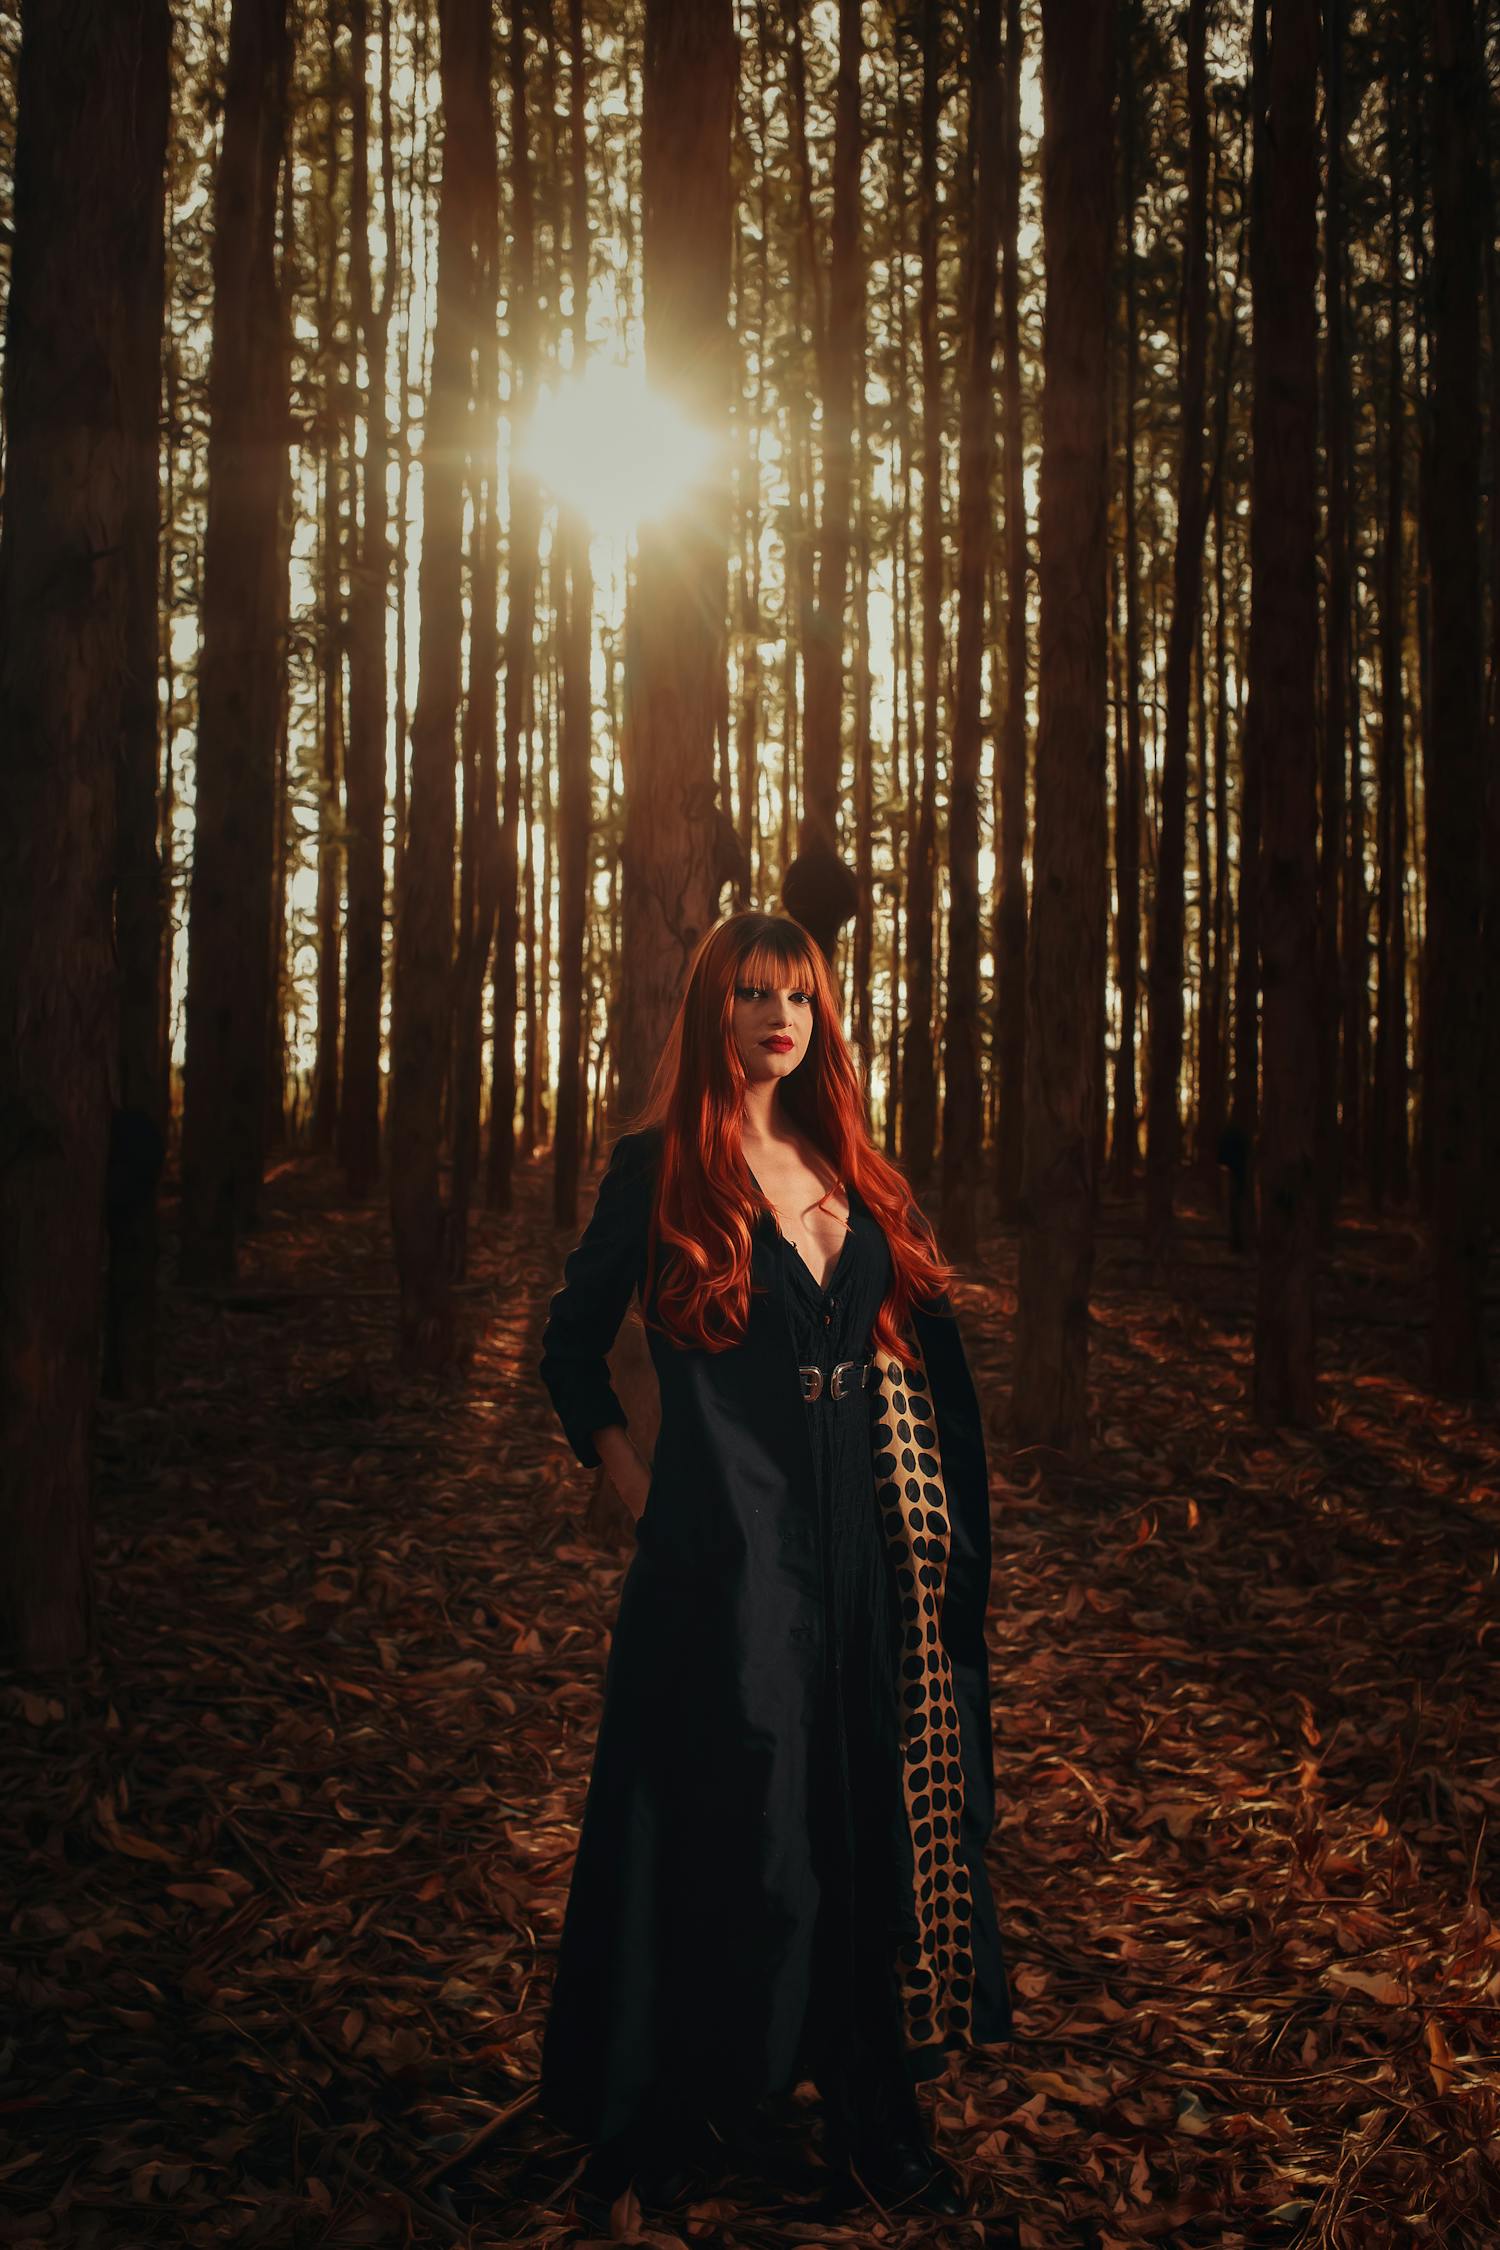 Woman in Black Long Sleeve Dress Standing in Forest · Free Stock Photo